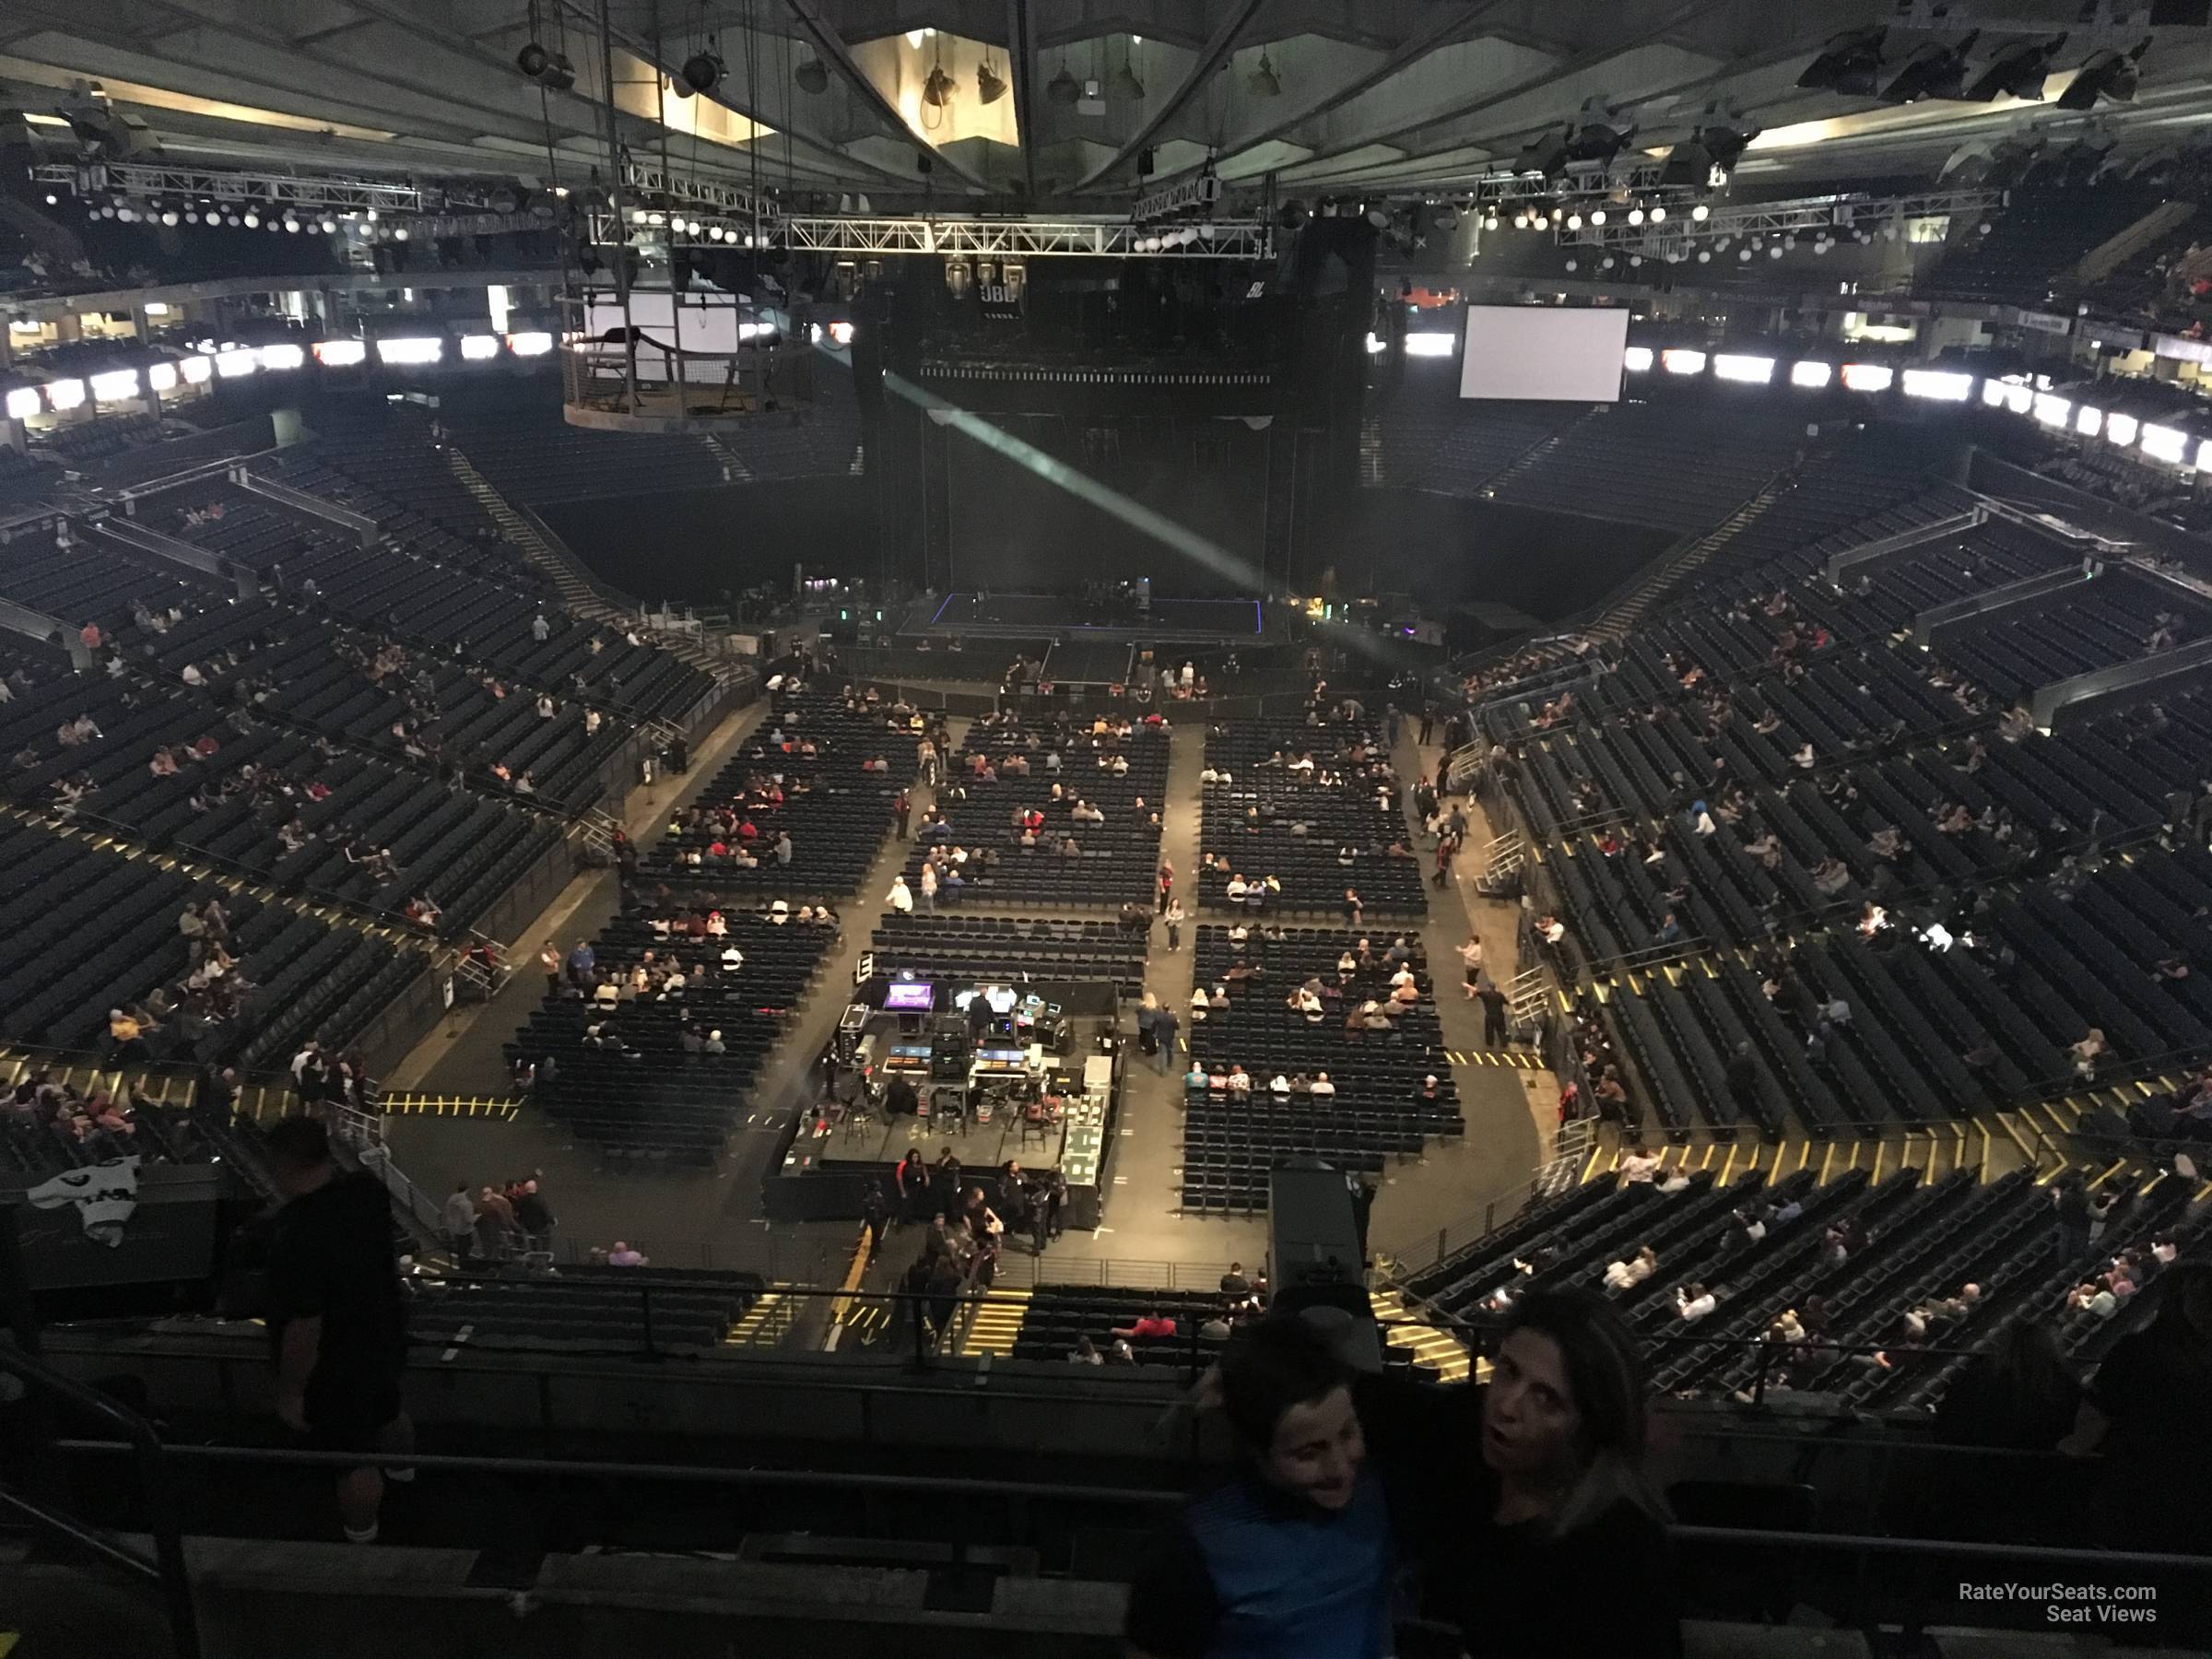 Oakland Arena Section 208 - RateYourSeats.com